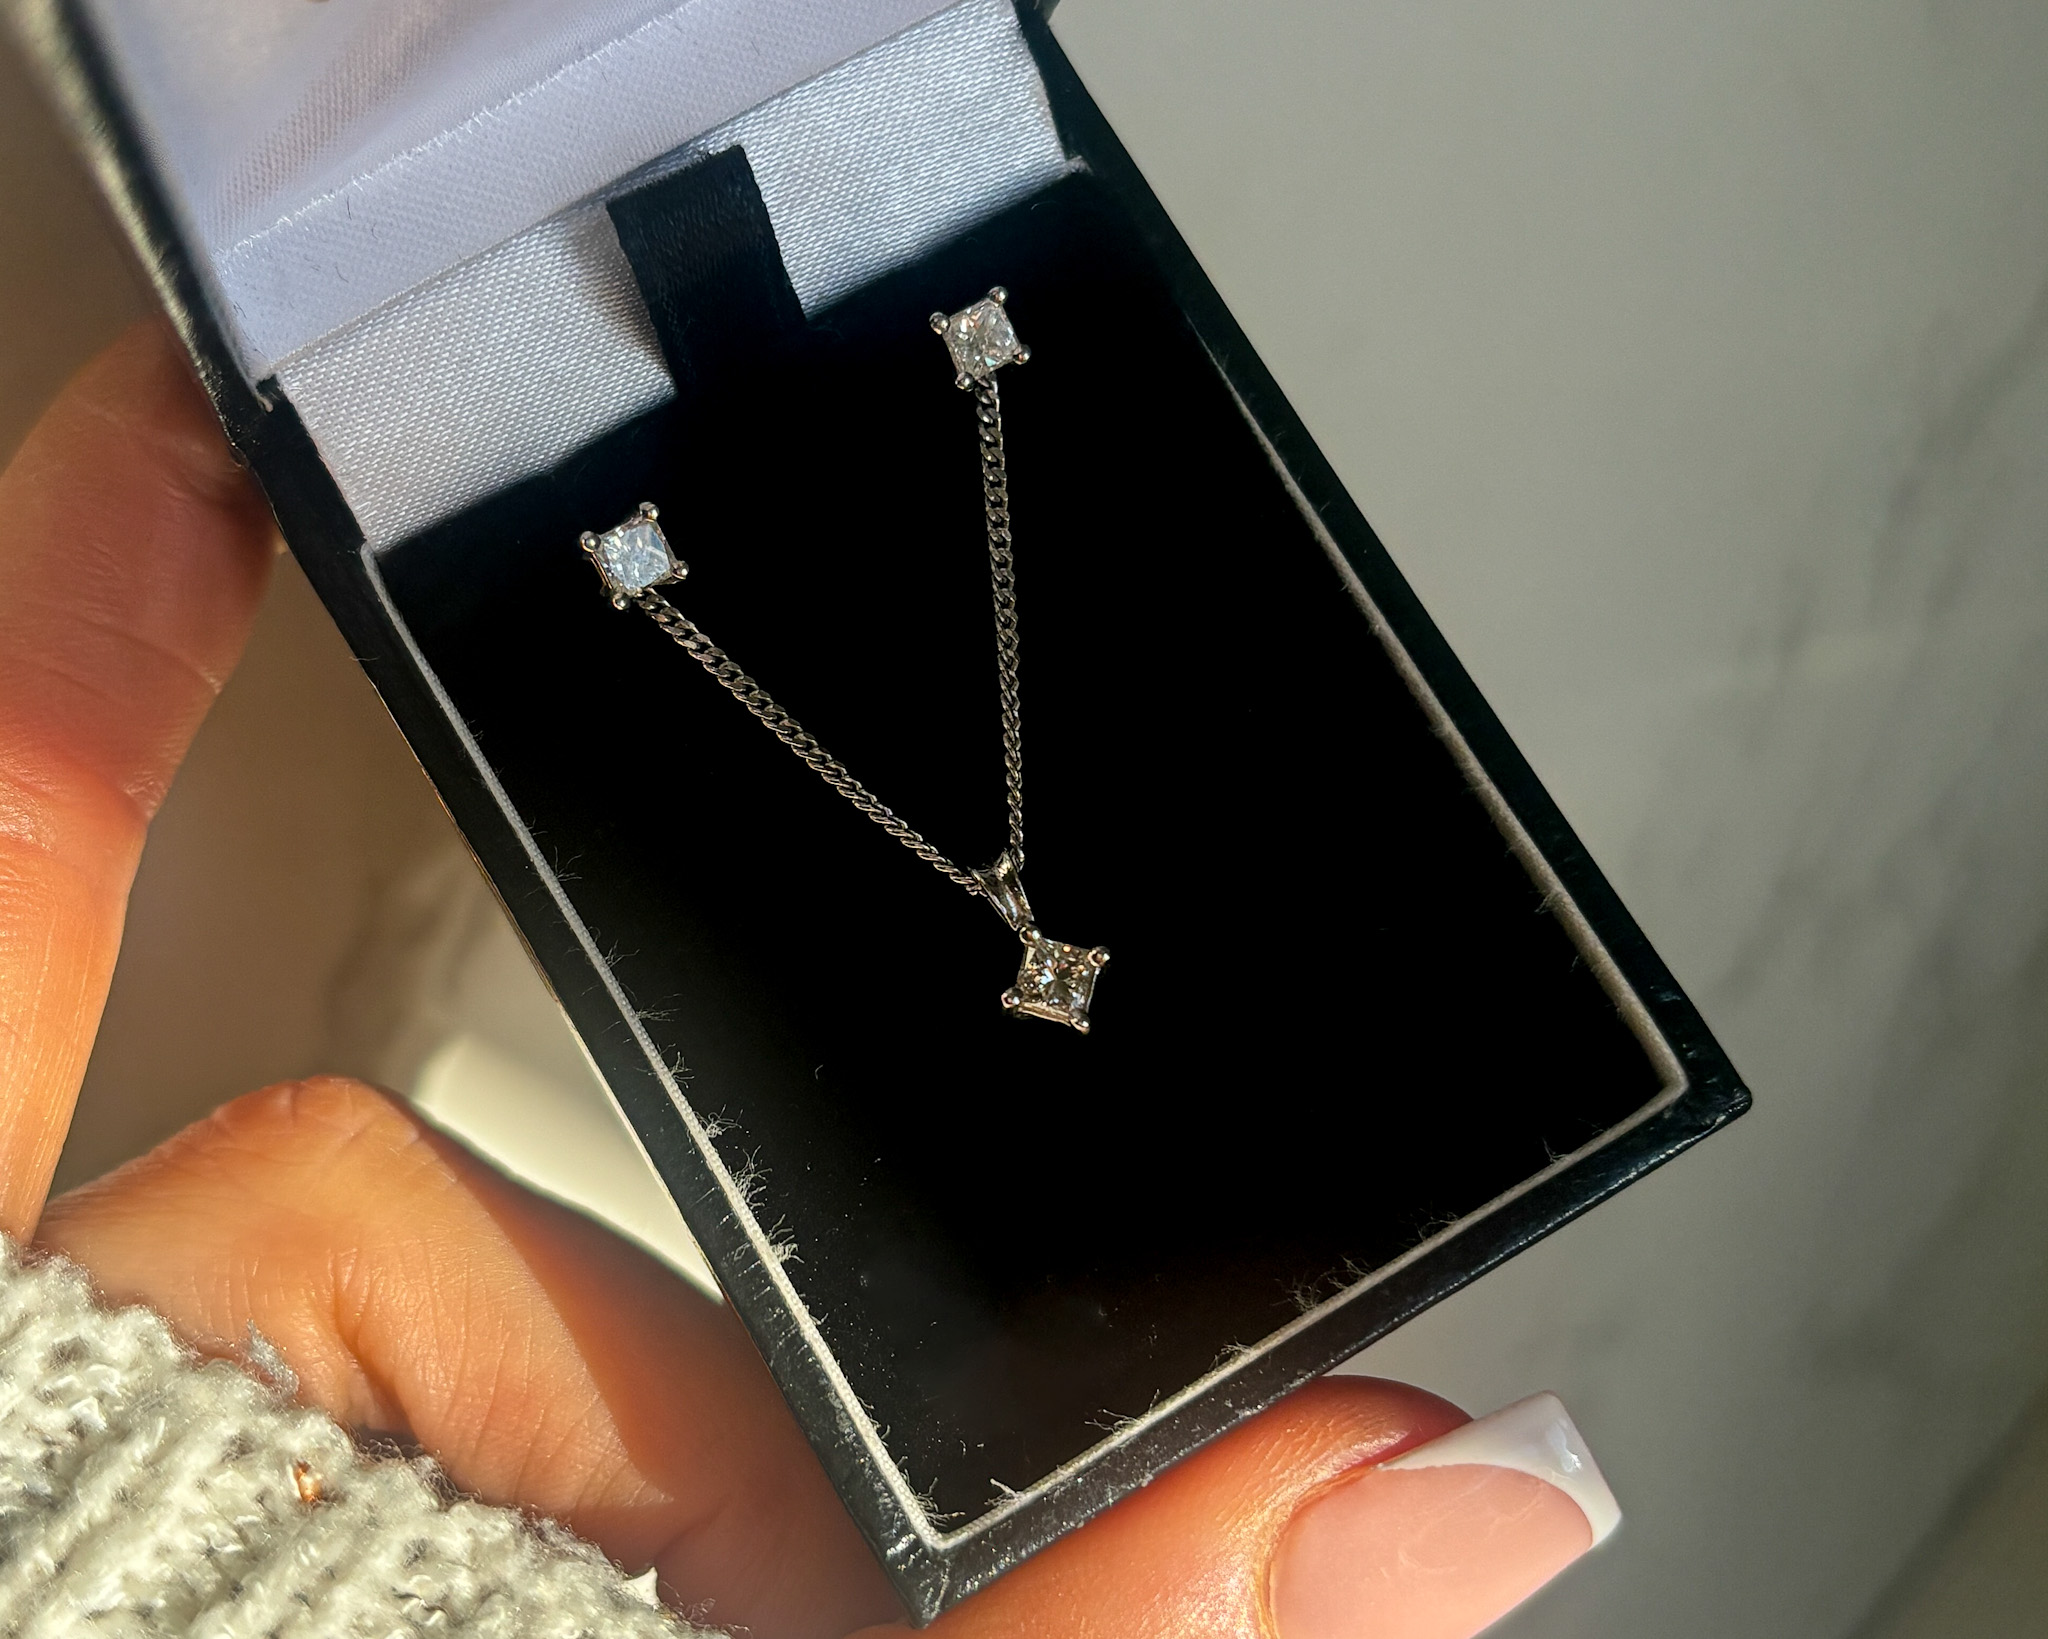 18ct white gold and diamond stud earrings and matching pendant set for sale in Leeds, Yorkshire